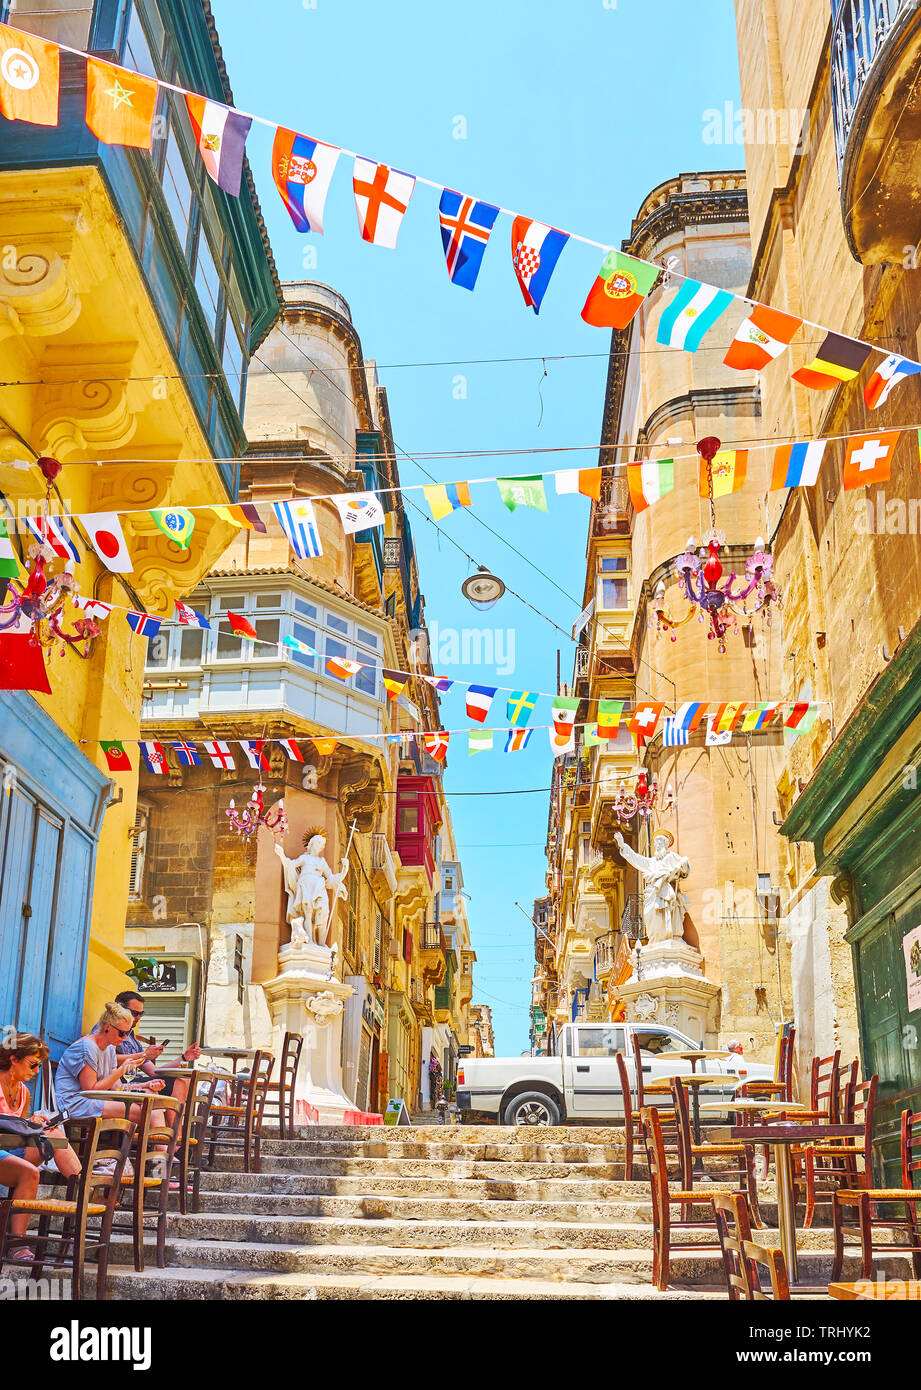 VALLETTA, MALTA - JUNE 19, 2018: The colorful flag garlands flutter in the wind above the narrow street of St Lucia, on June 19 in Valletta Stock Photo